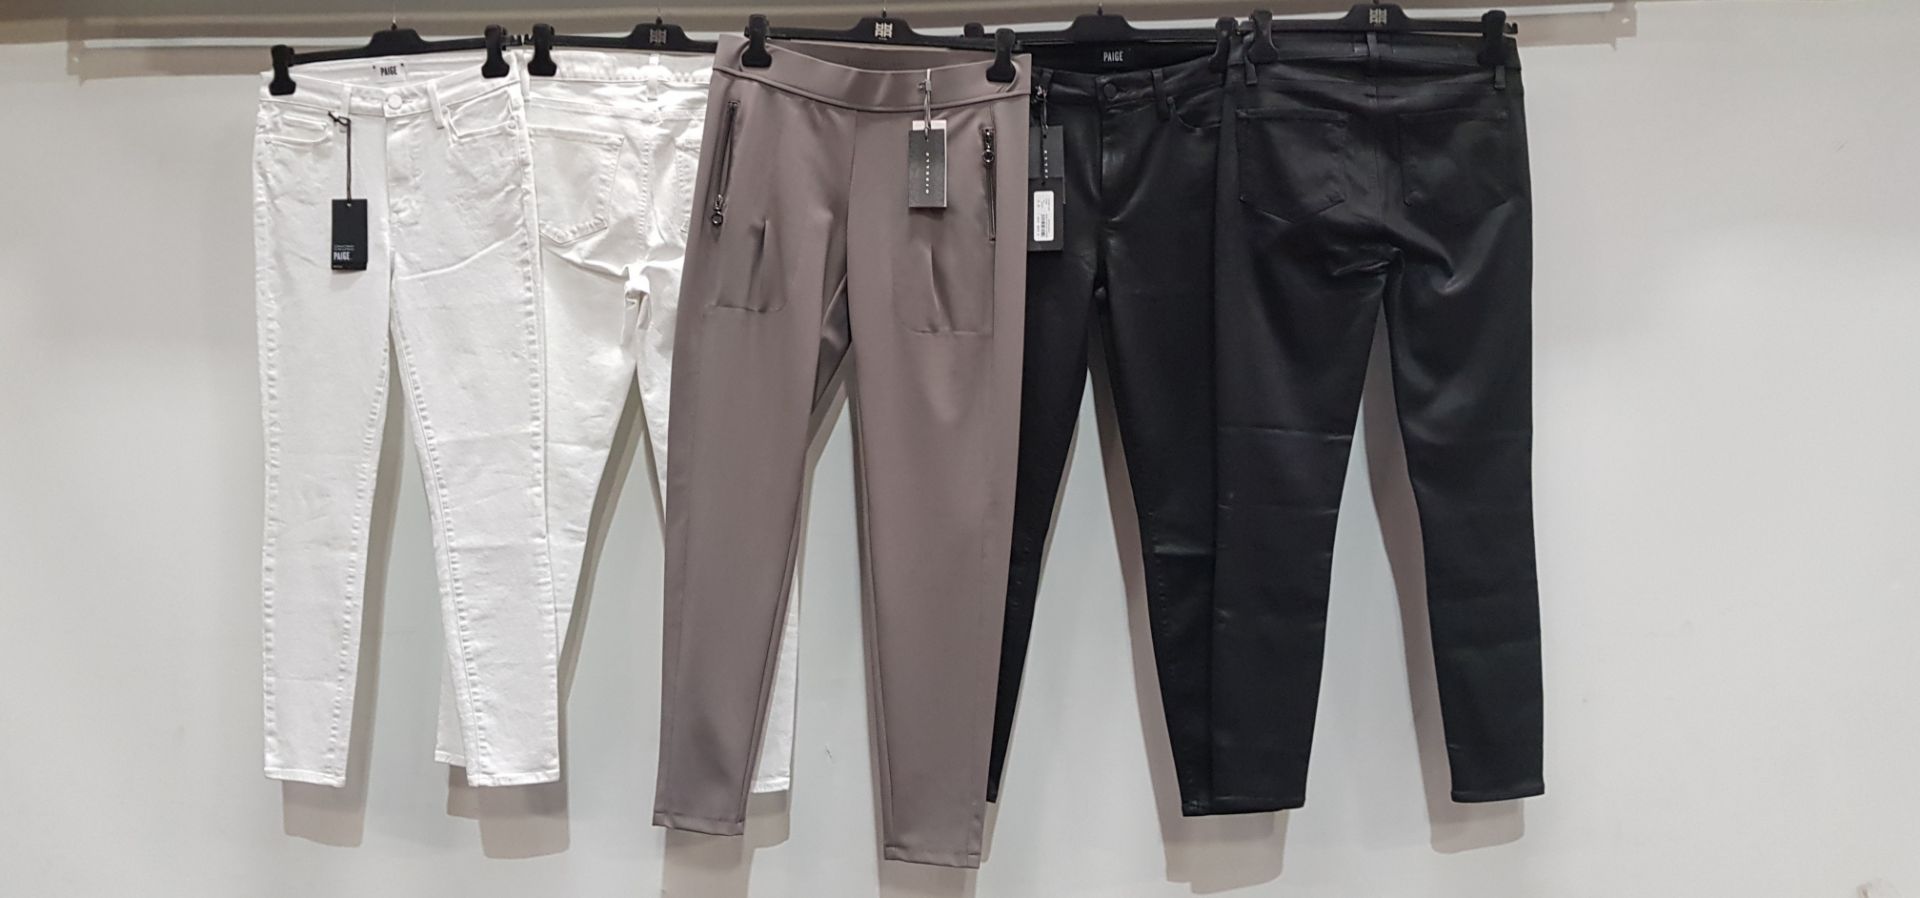 5 PIECE MIXED BRAND NEW PANTS LOT CONTAINING 2 X PAIGE BLACK FOG LUXE COATING PANTS, 2 X PAIGE